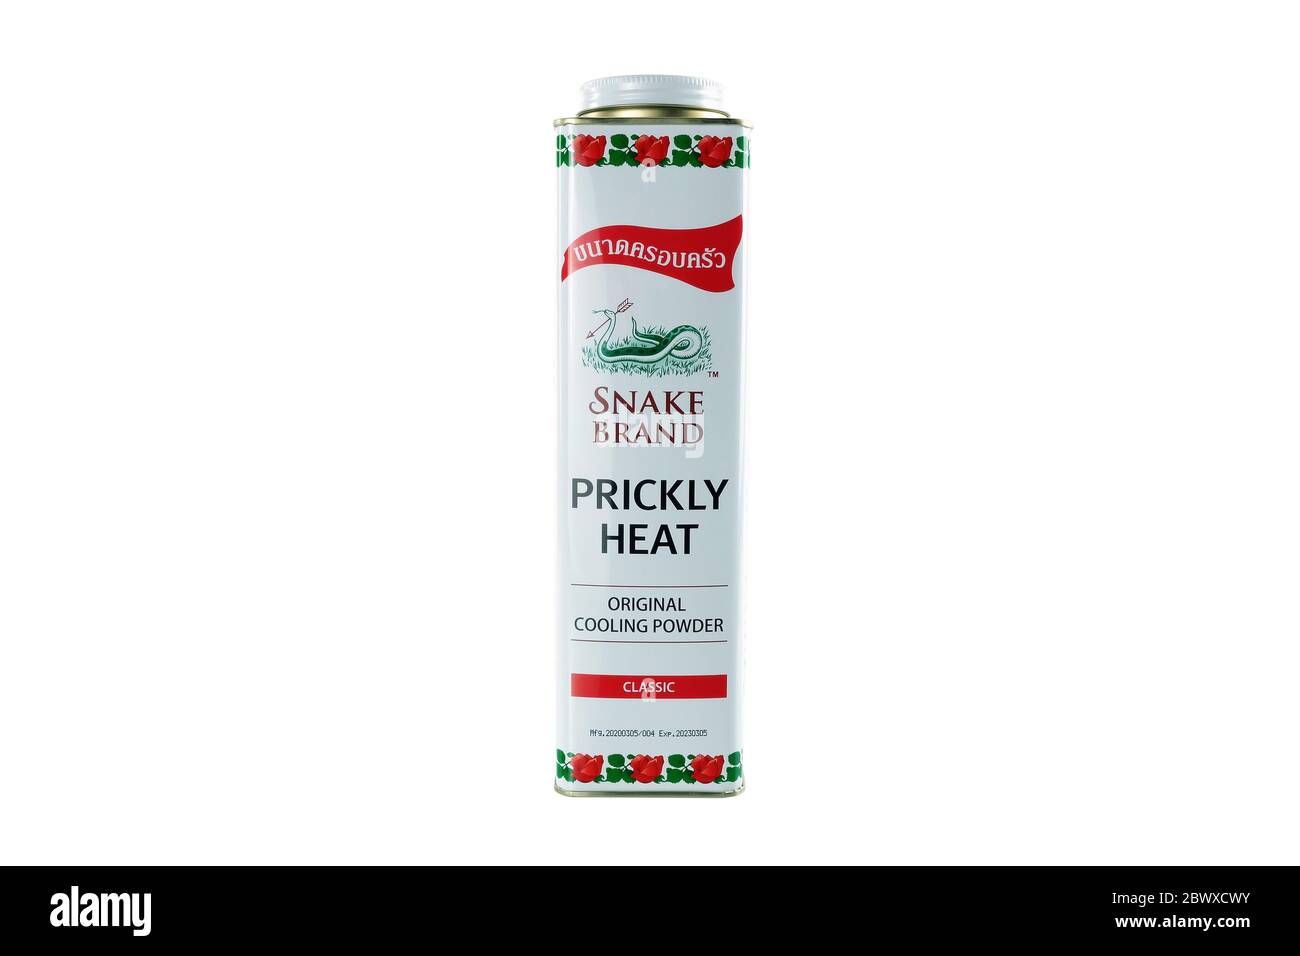 BANGKOK, THAILAND - APRIL 15, 2020: Snake brand, Prickly heat original cooling powder. Snake brand is manufactured in Thailand by The British Dispensa Stock Photo